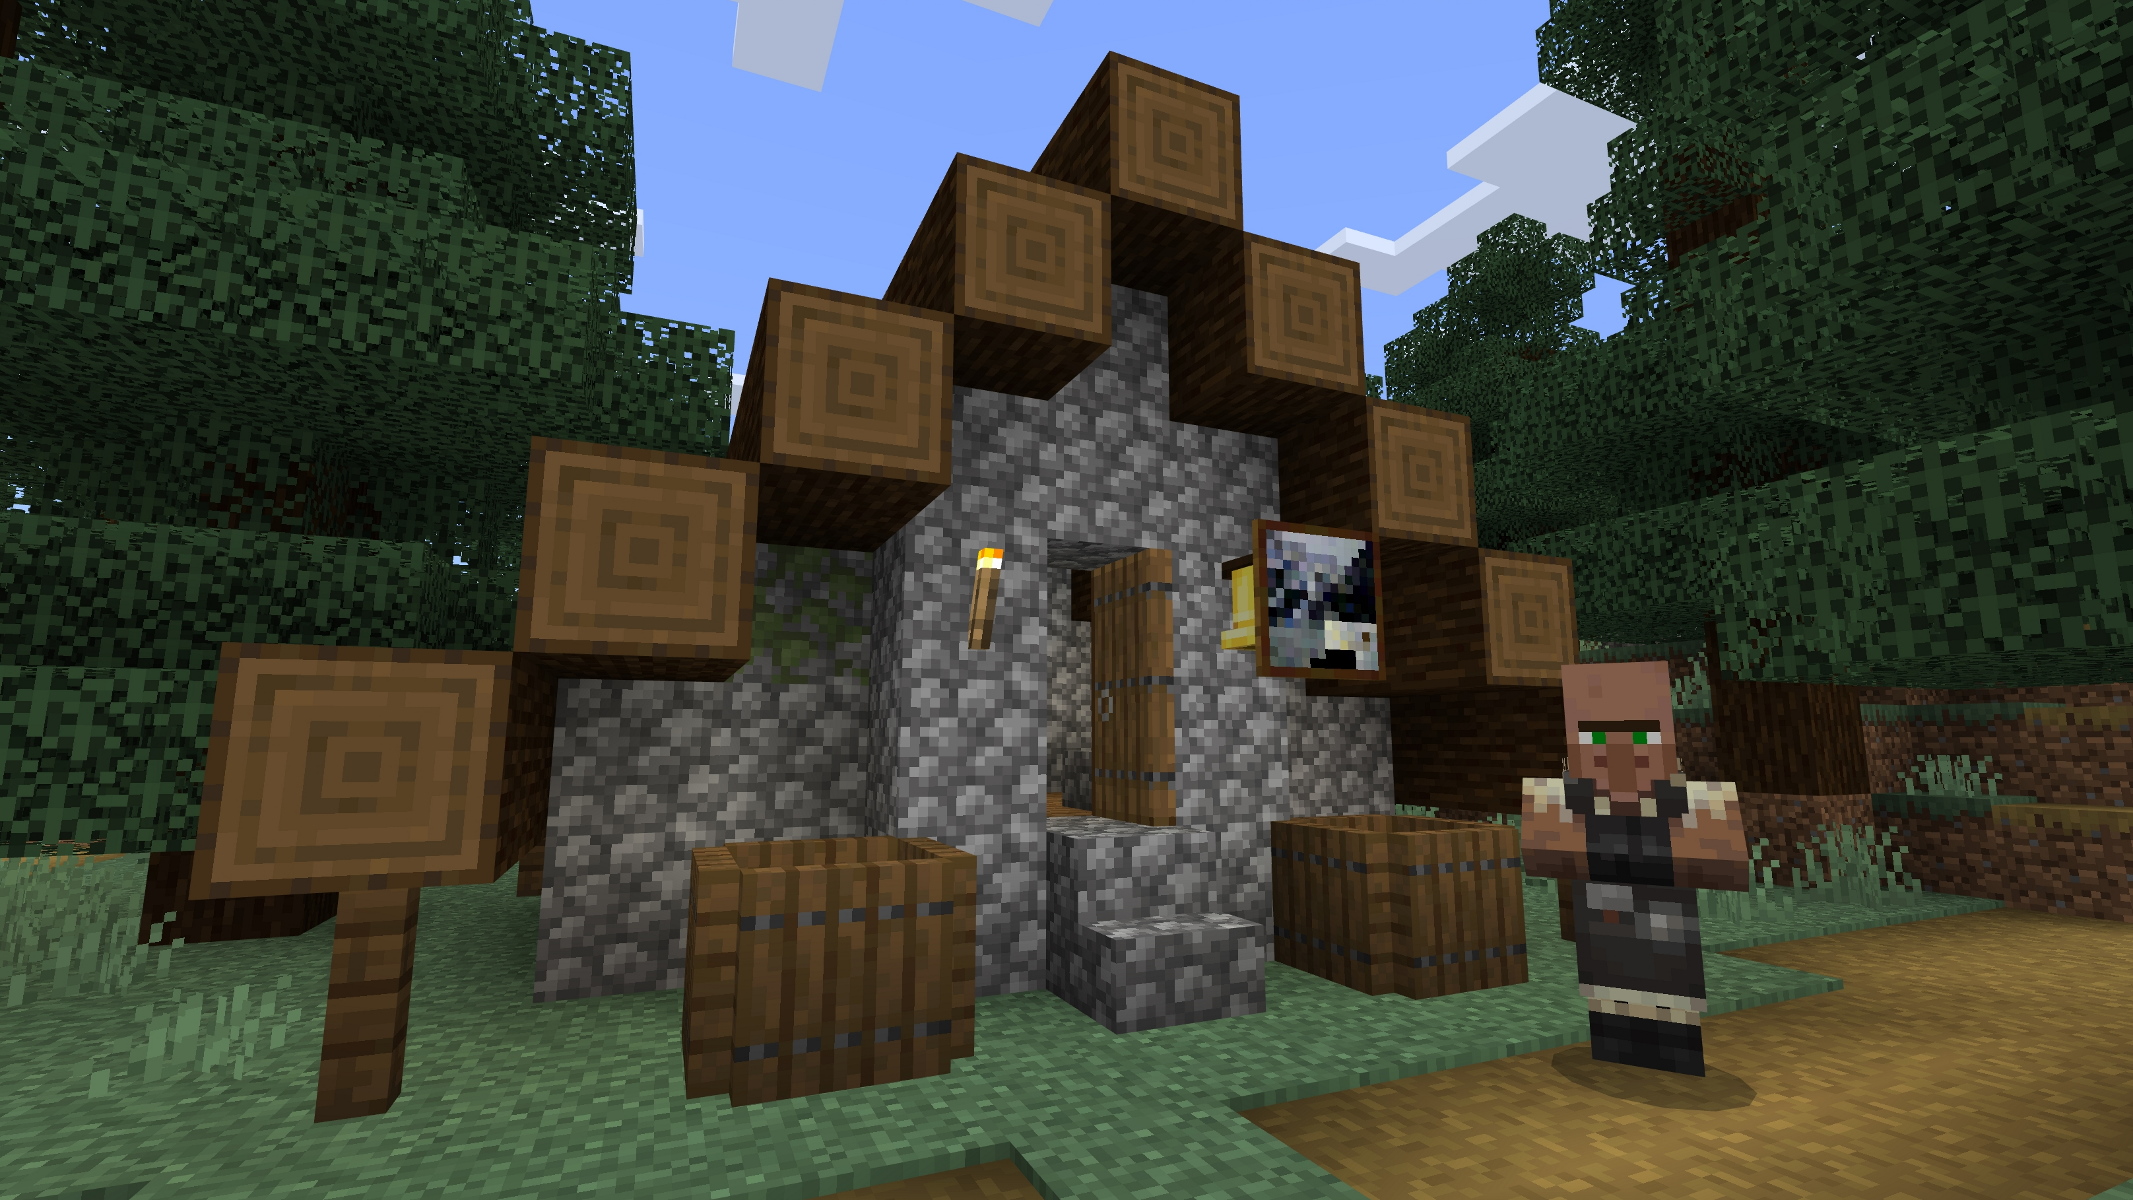 A Minecraft house and Villager